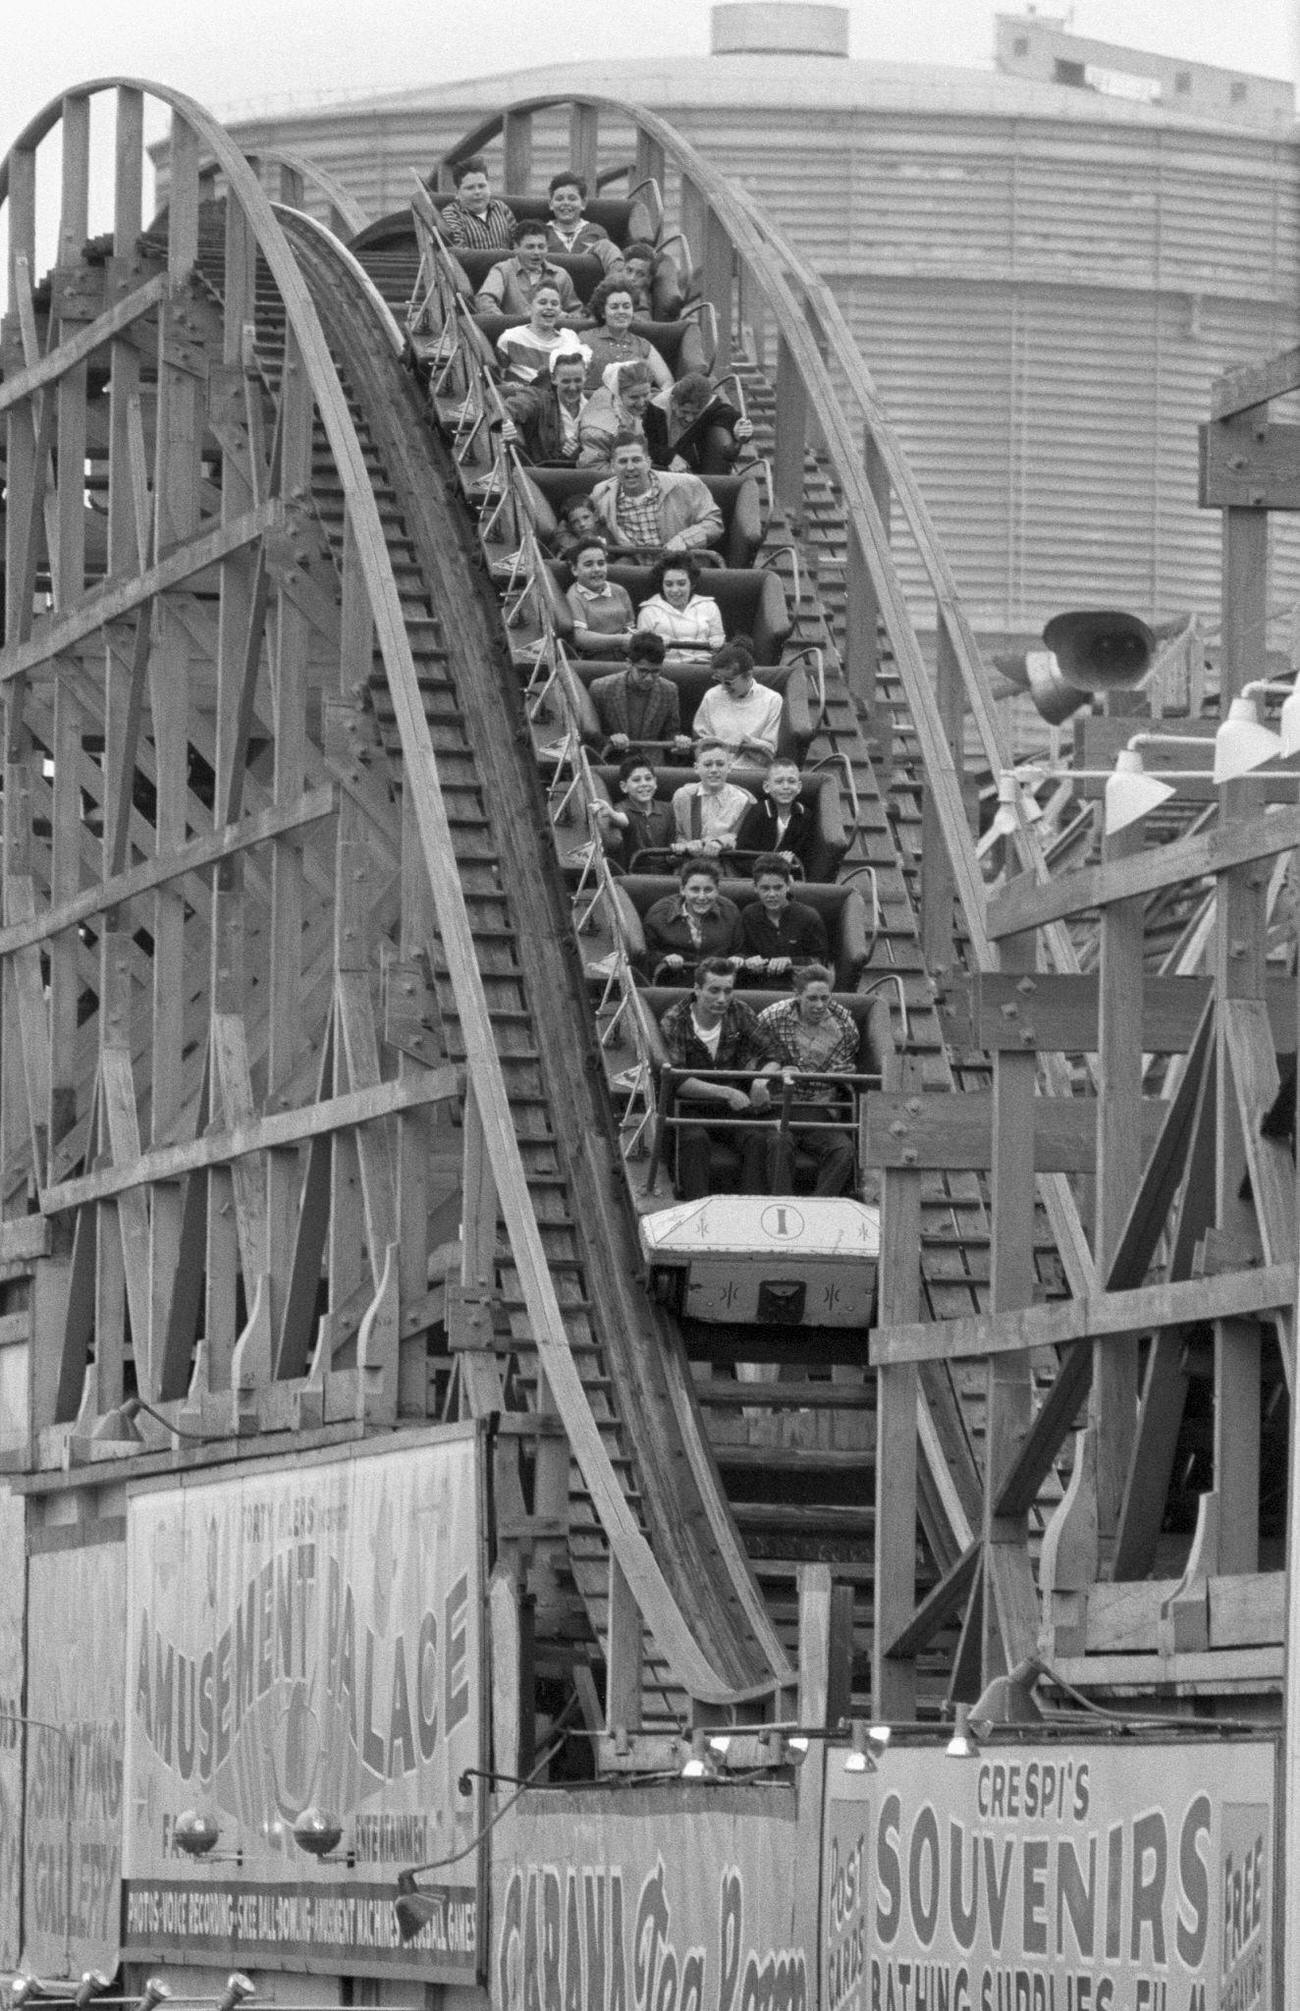 Reactions On Roller Coaster Captured, May 1959